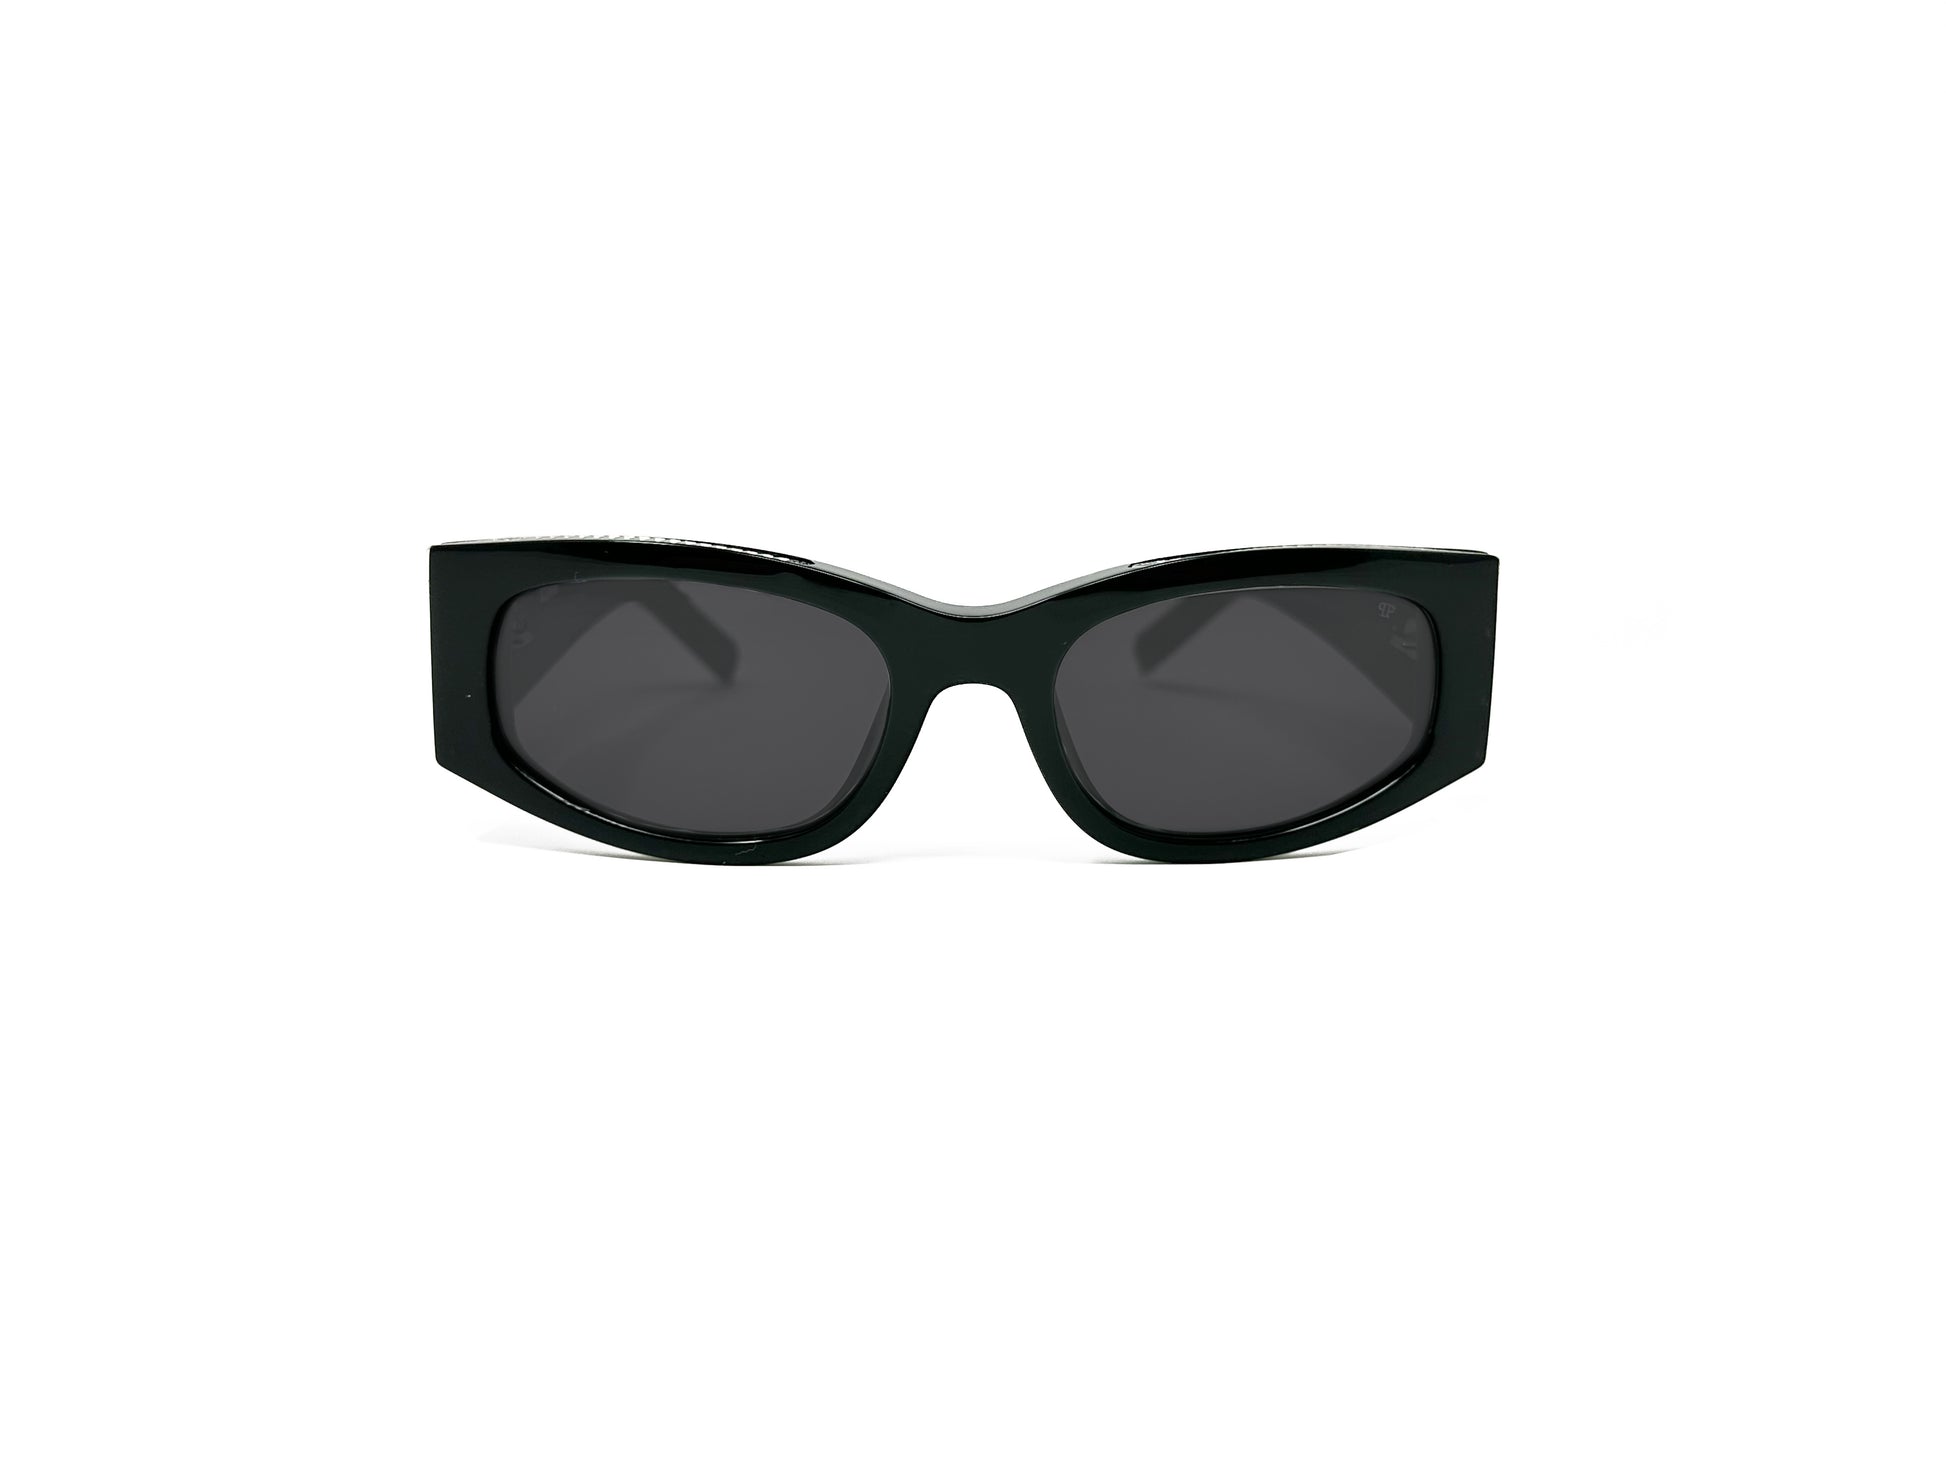 Philipp Plein curved, rectangular, acetate sunglass with an upswept lift and straight sides. Model: Nobile Rome. Color: 0700 Black. Front view.